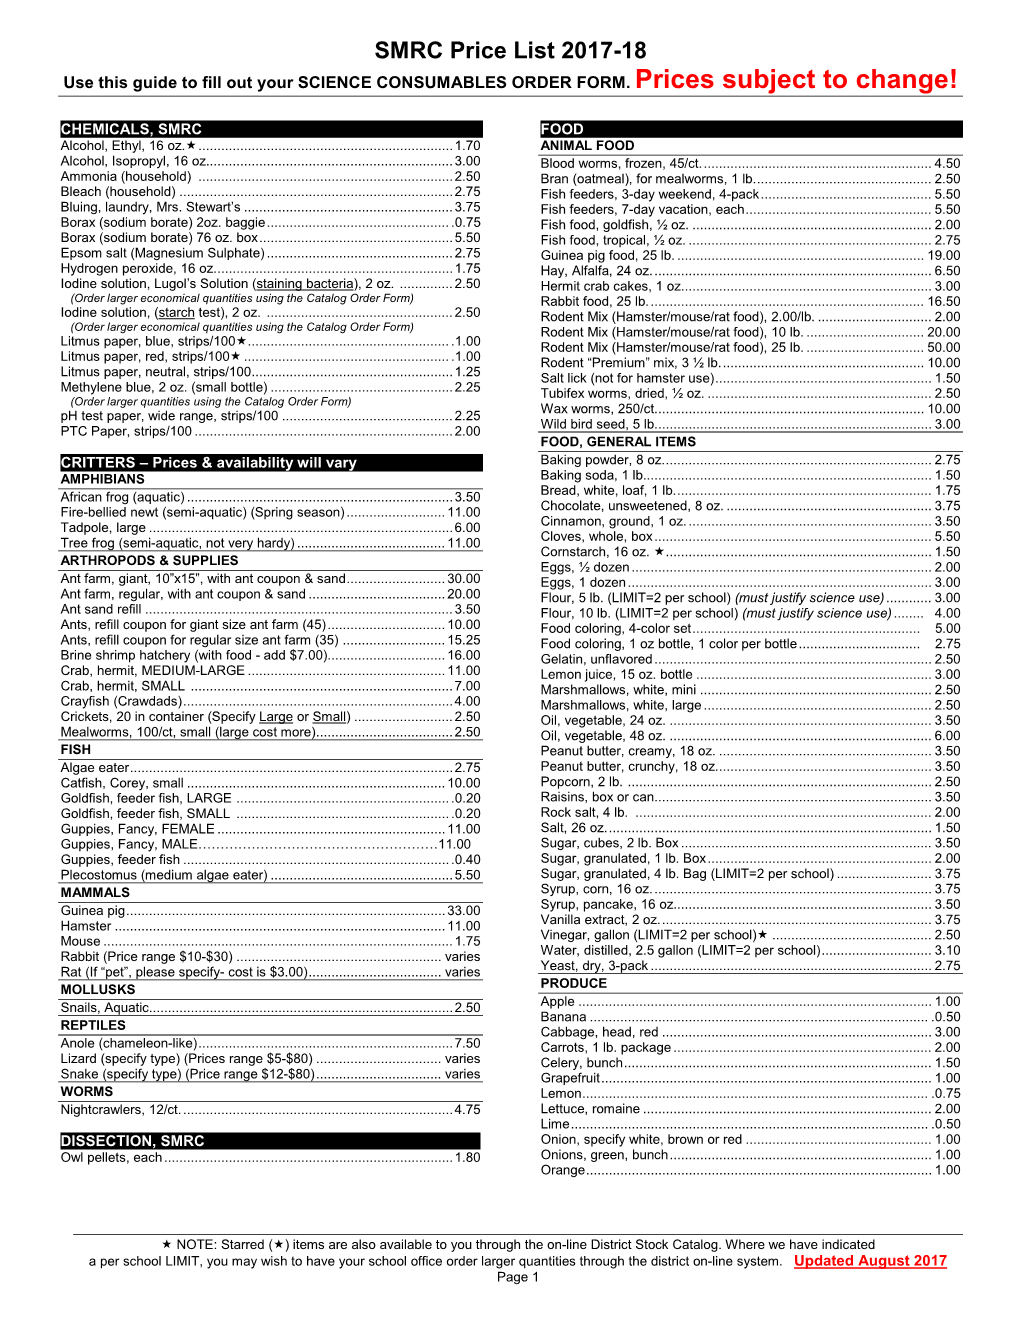 SMRC Price List 2017-18 Use This Guide to Fill out Your SCIENCE CONSUMABLES ORDER FORM